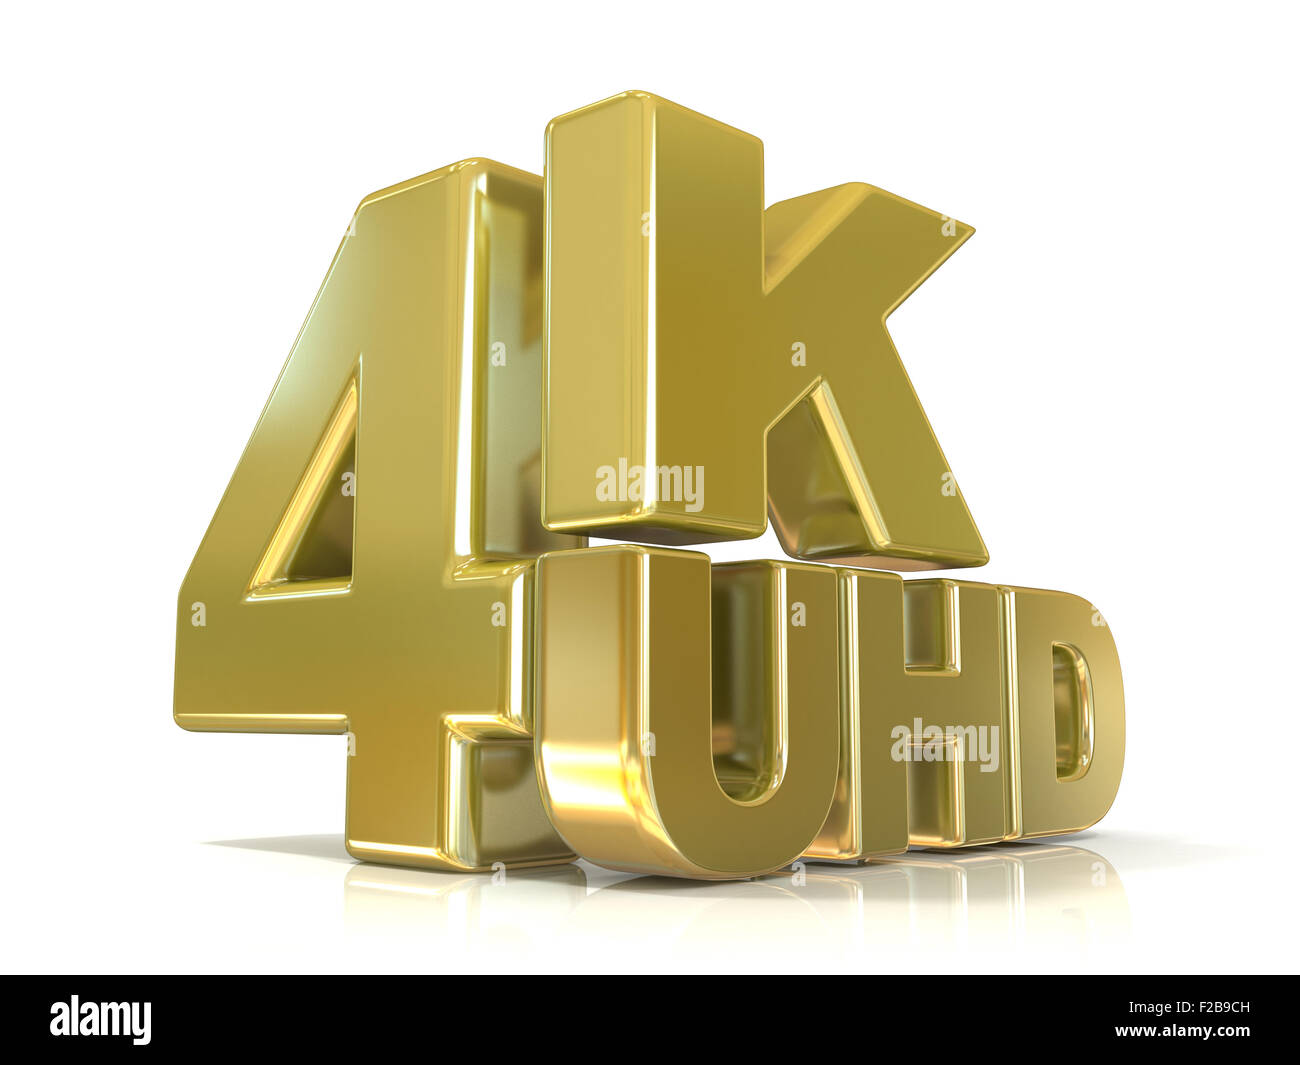 Ultra HD (high definition) resolution technology. 4K UHD concept. 3D render illustration isolated on white background Stock Photo